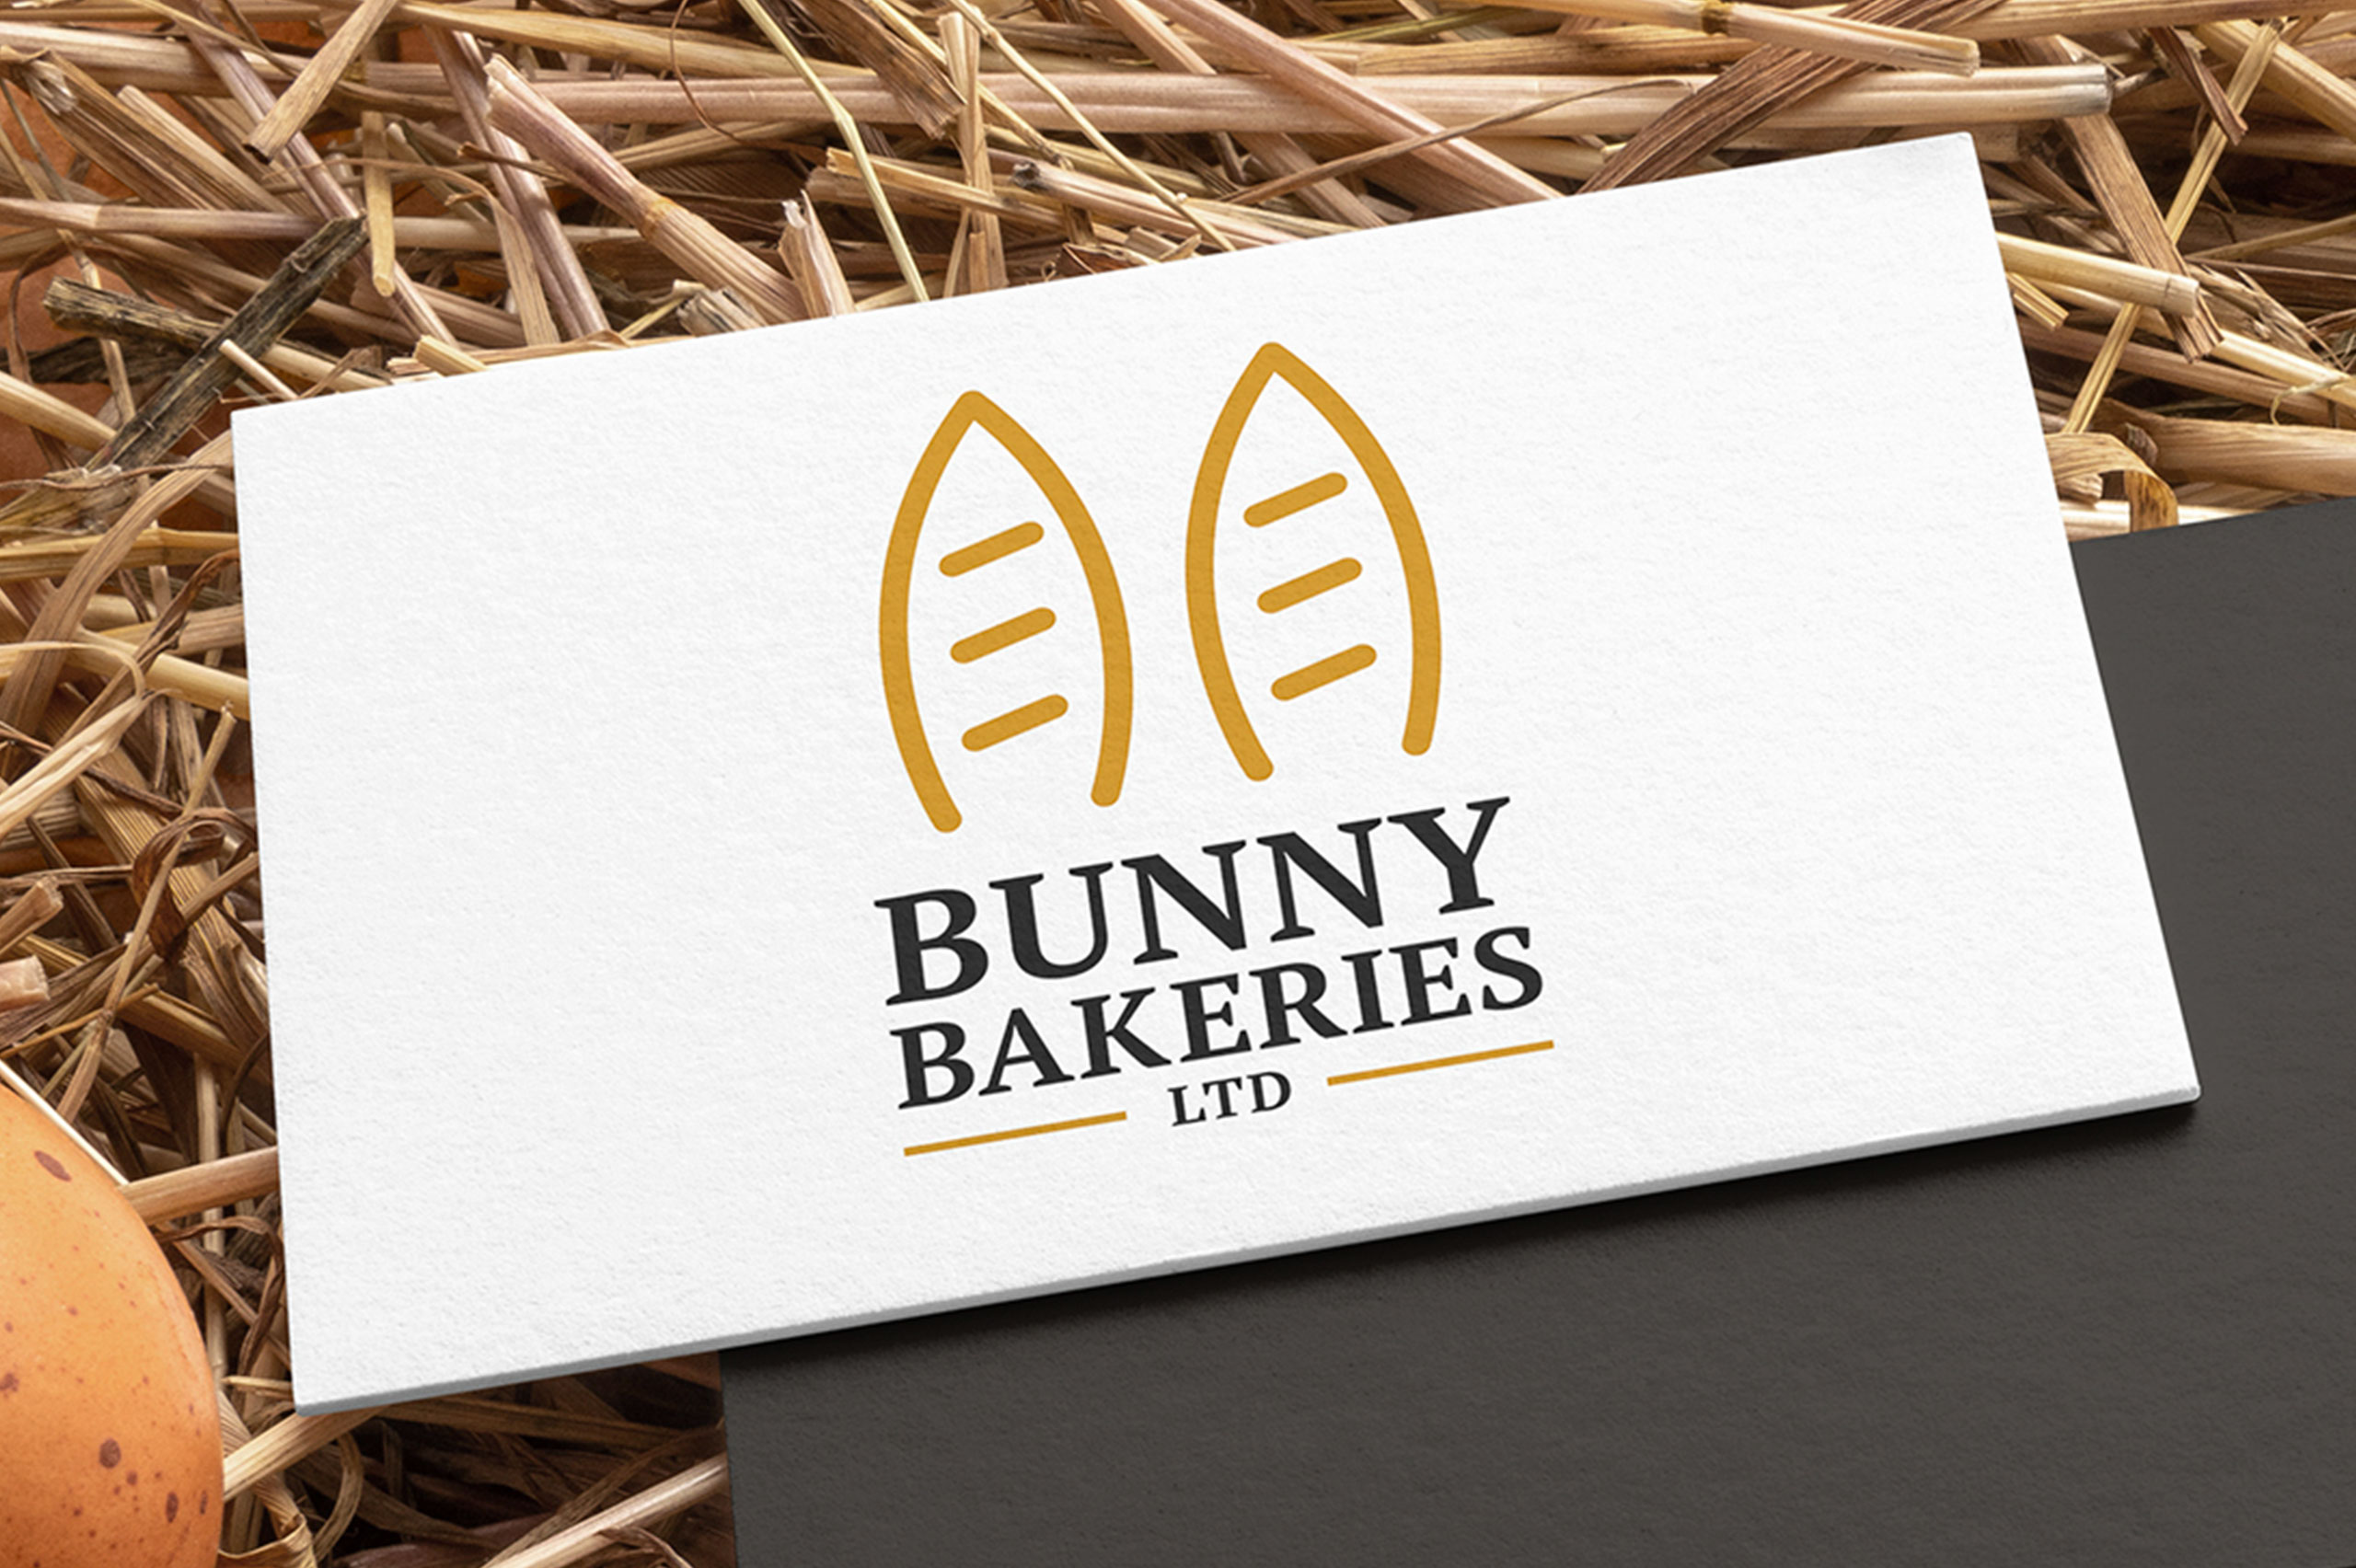 Bunny Bakeries Limited